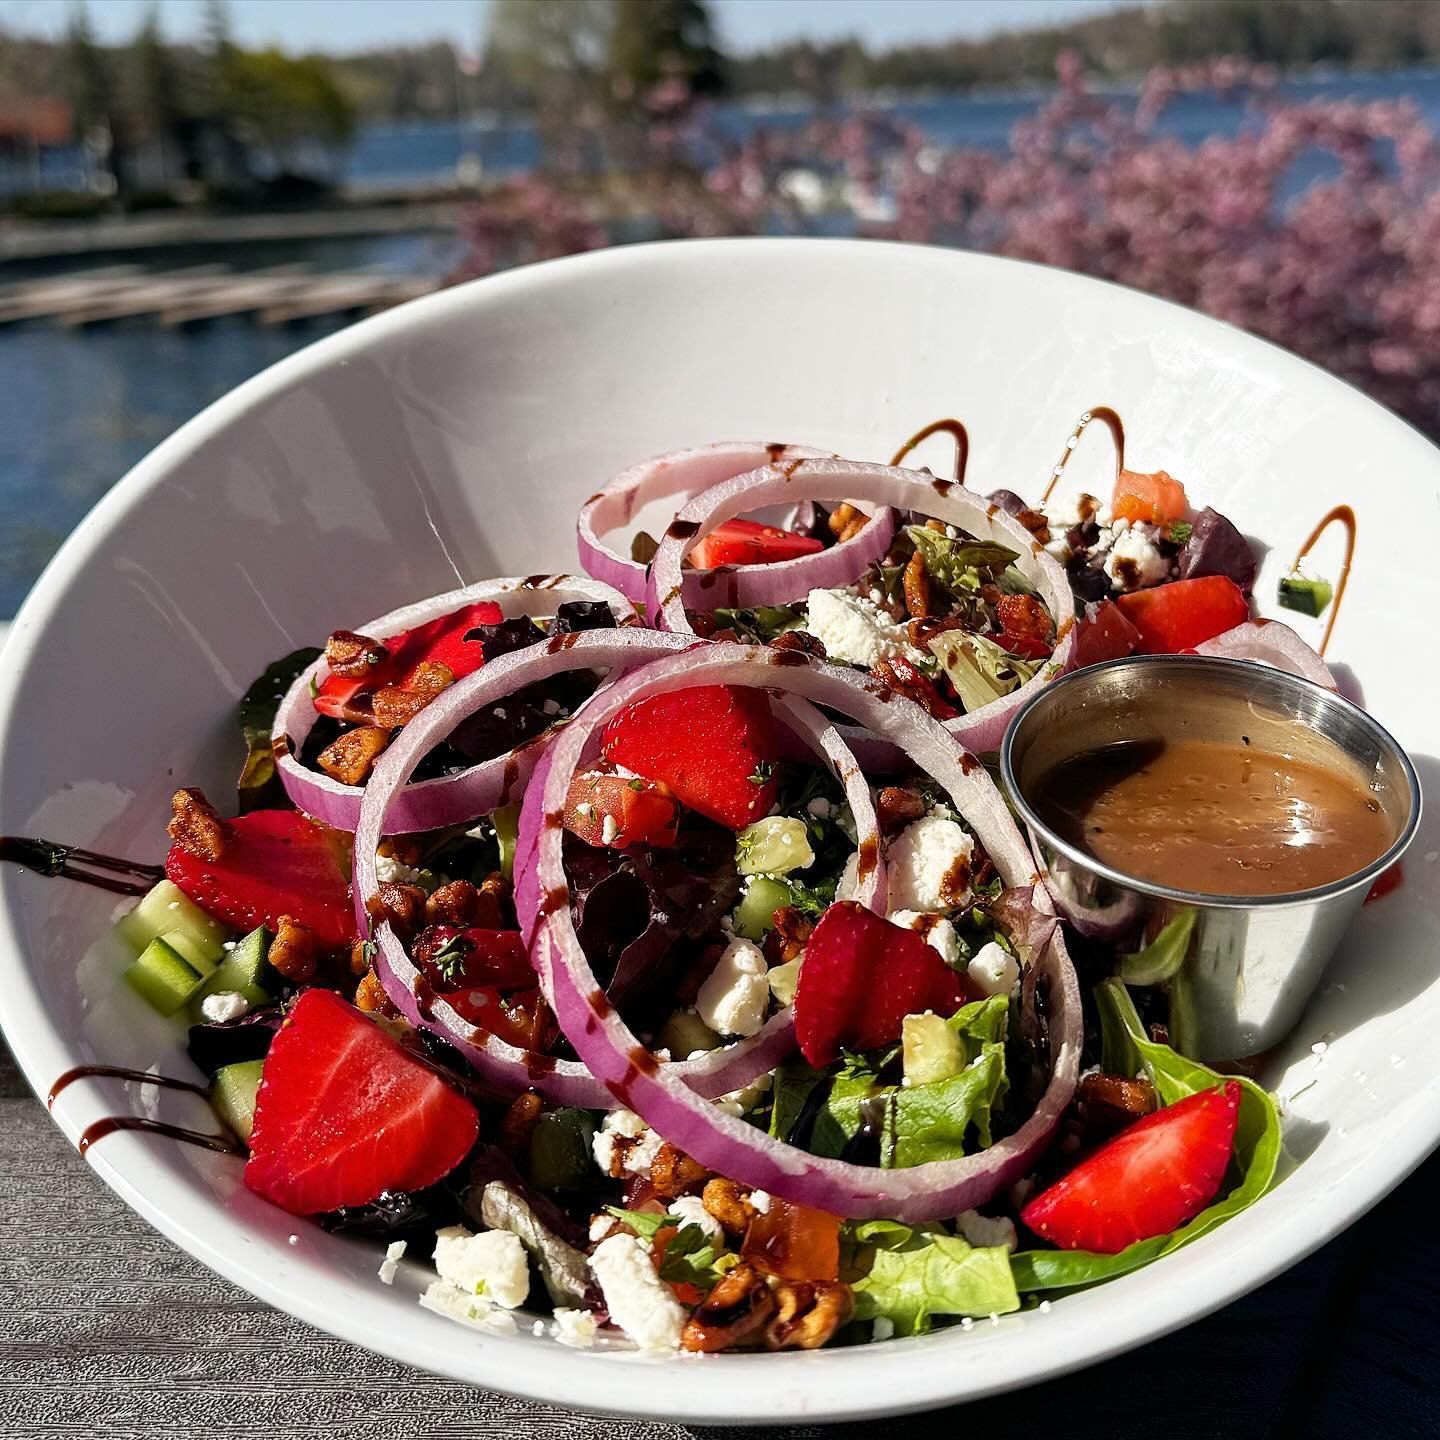 🥗 Our new #seasonalsalad has arrived! 🍓Treat your tastebuds to refreshing mixed greens, diced red onions, tomatoes, cucumbers, feta, sliced strawberries, candied pecans, a drizzle of balsamic glaze and a dressing of your choice. It&rsquo;s the perf